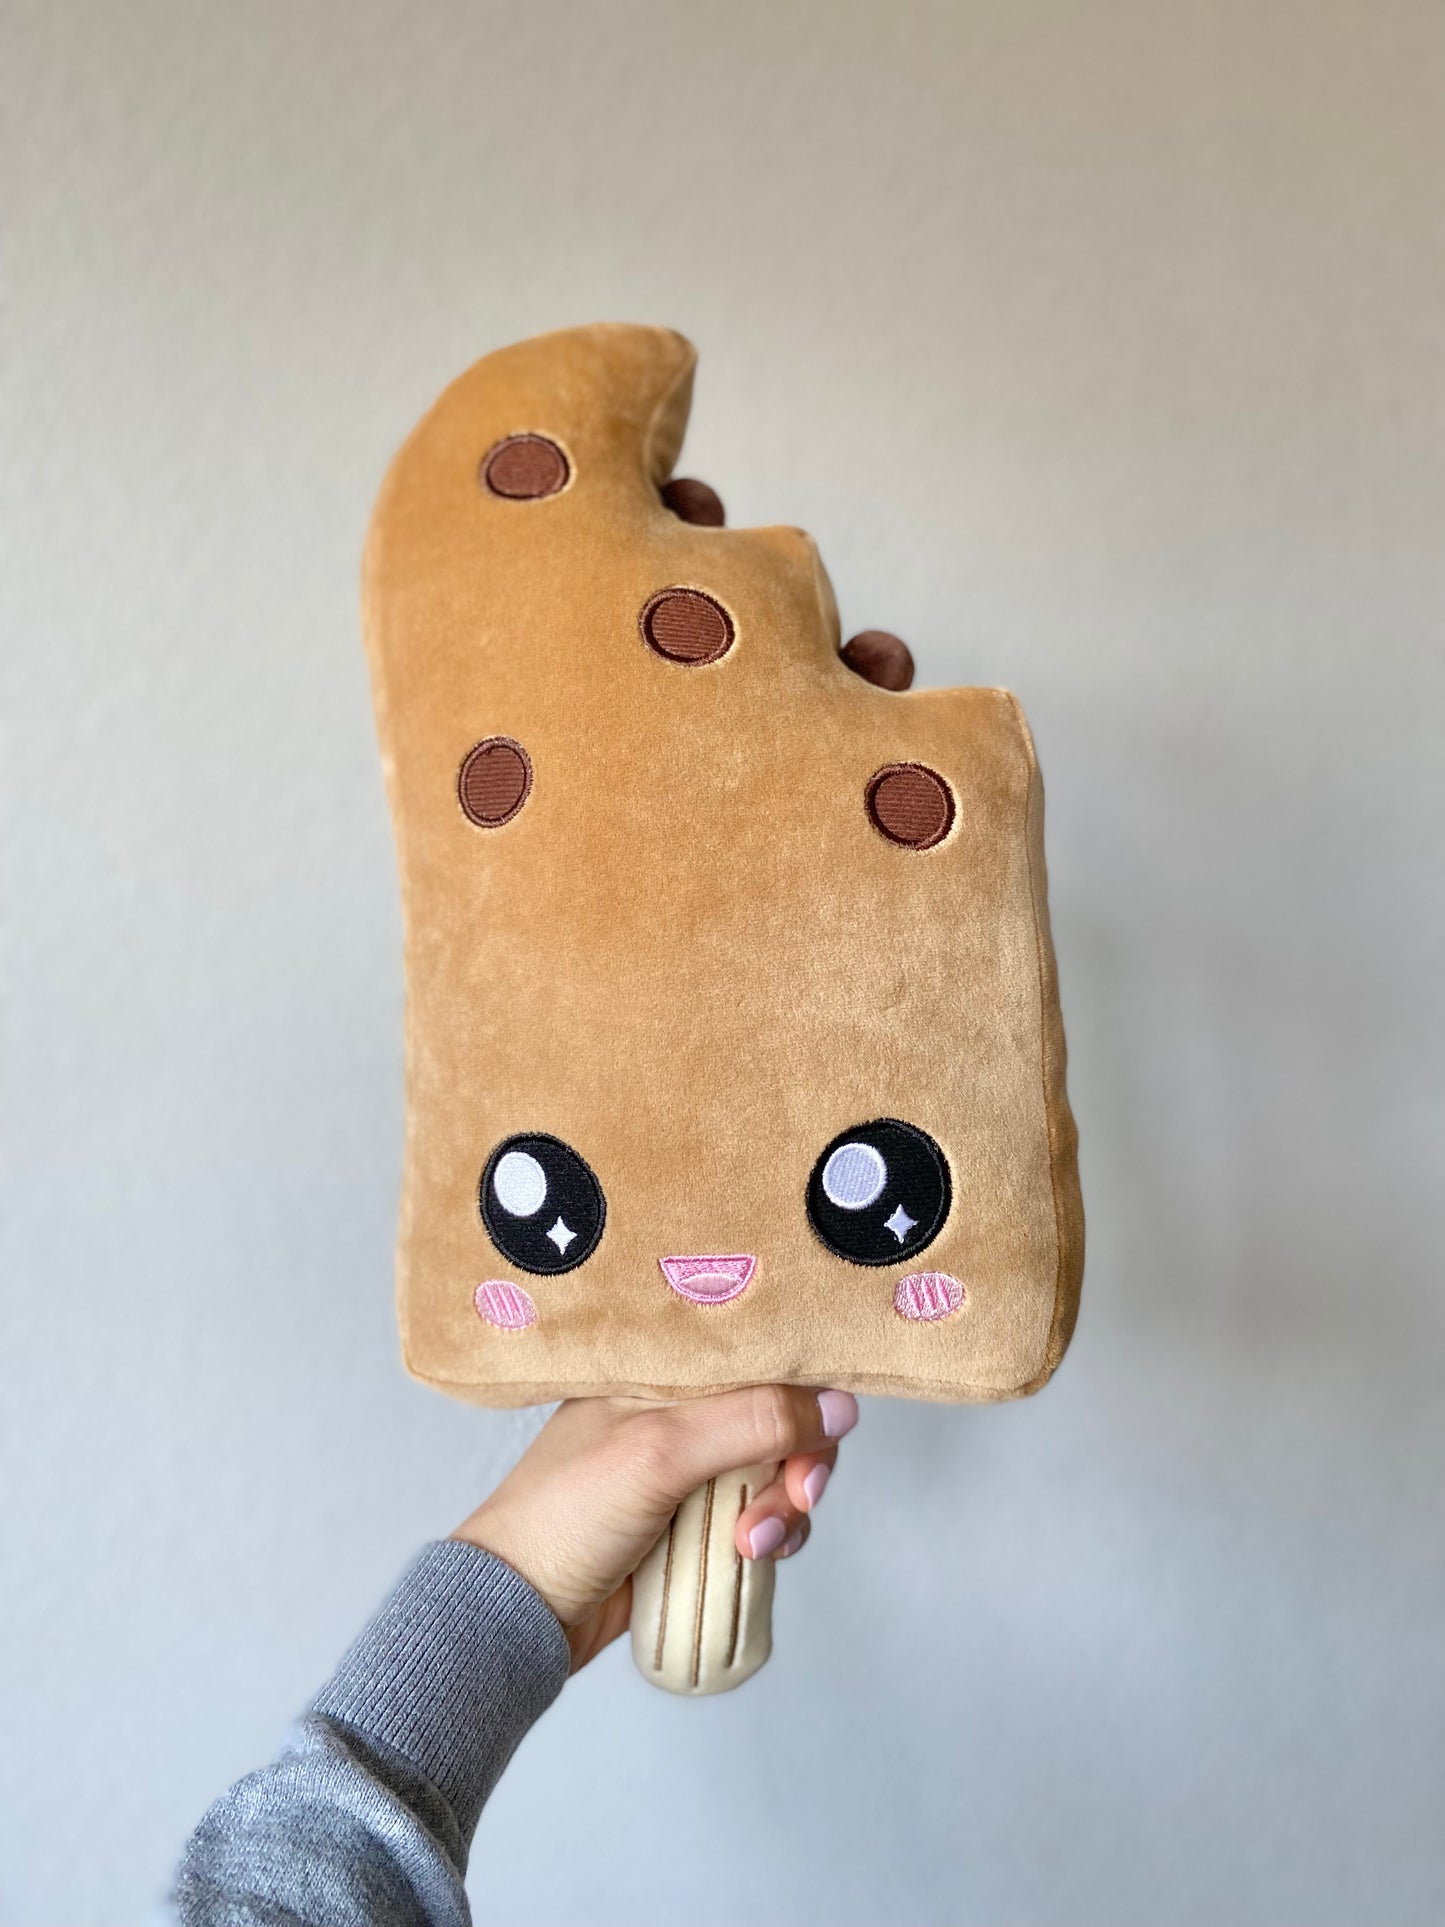 Plush toy of a boba ice cream bar with a smiling face, held by the bottom portion resembling a popsicle stick.